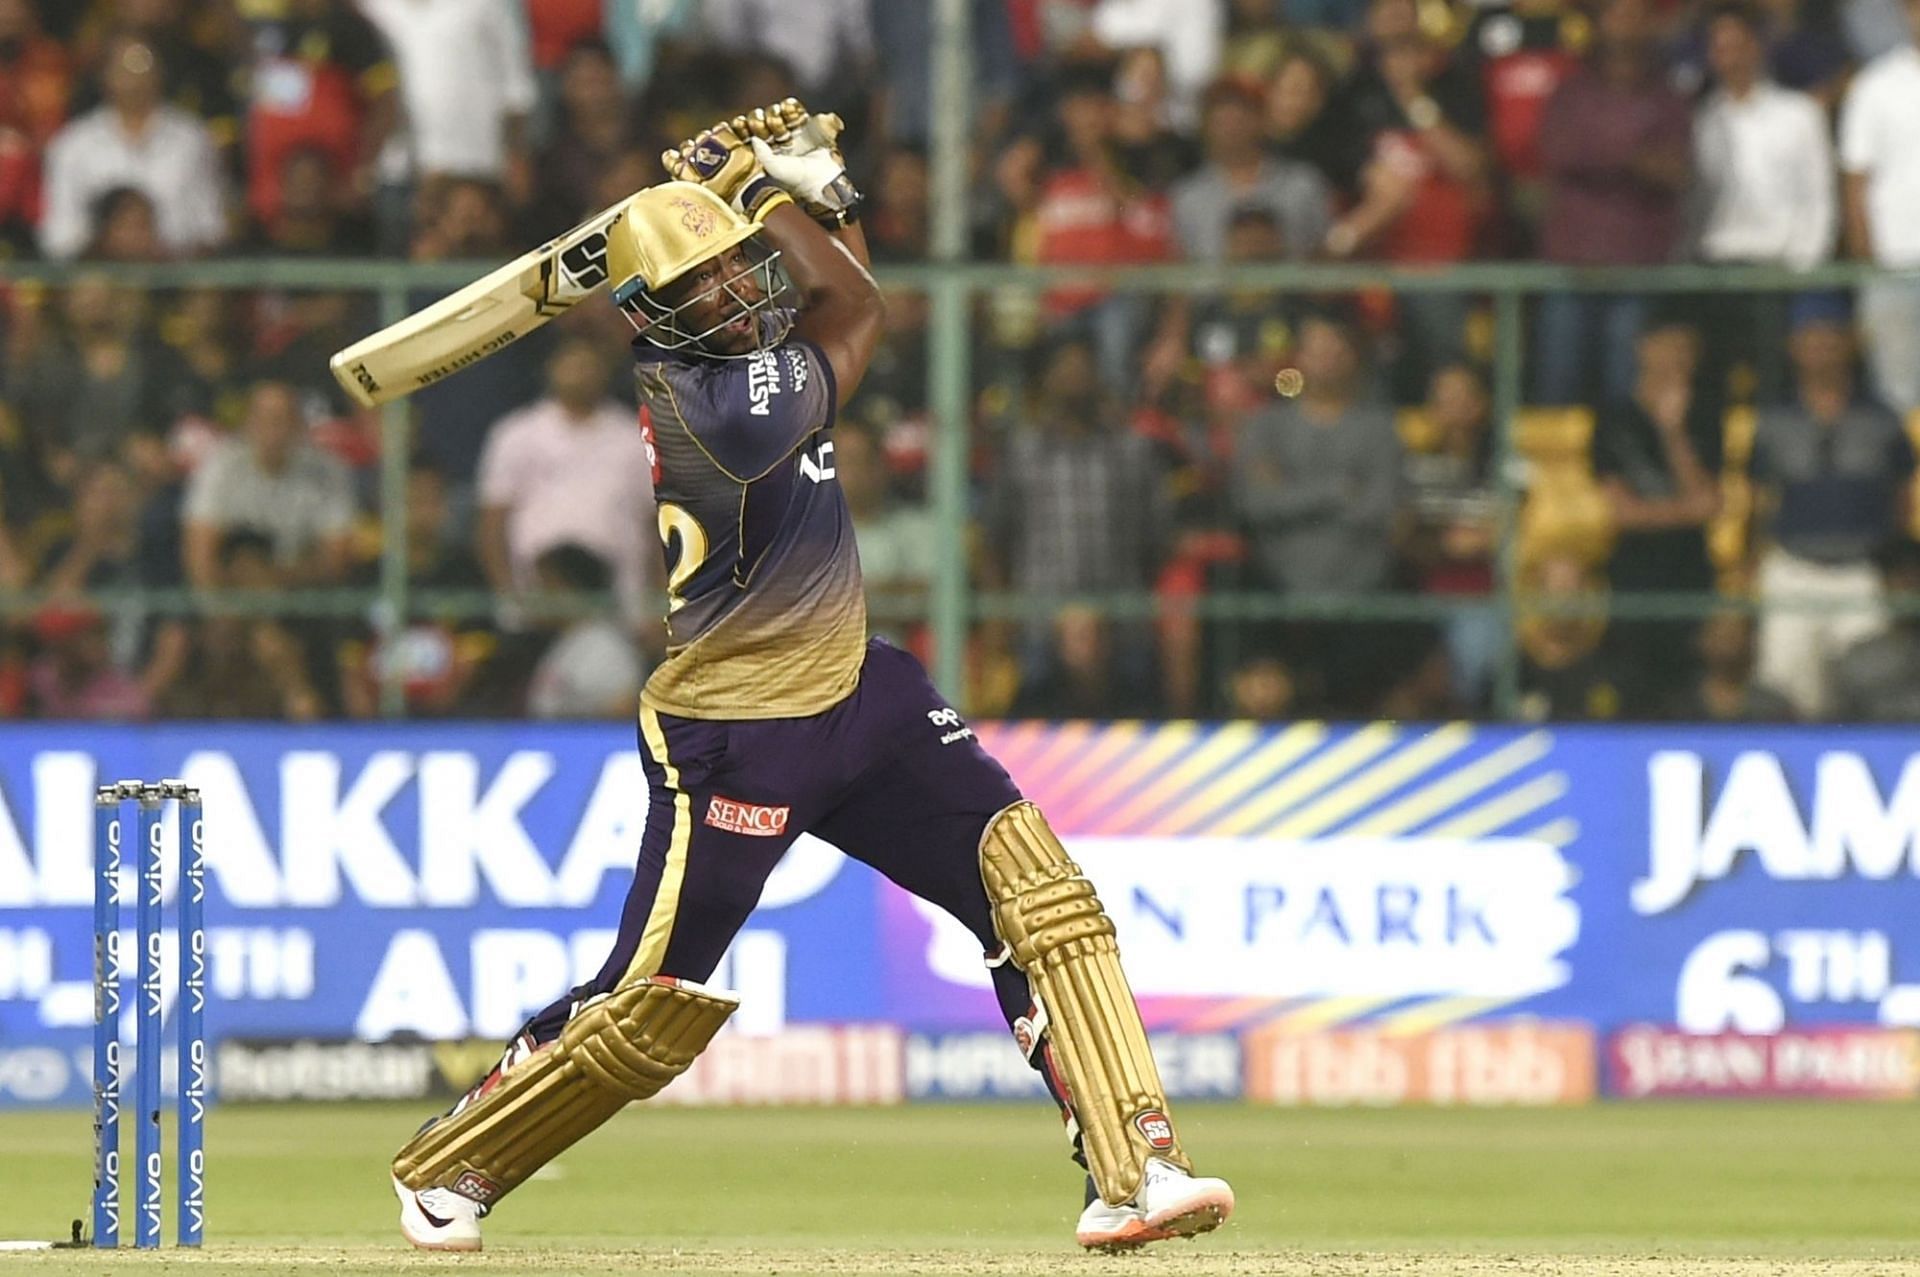 Russell took down RCB with a stunning assault